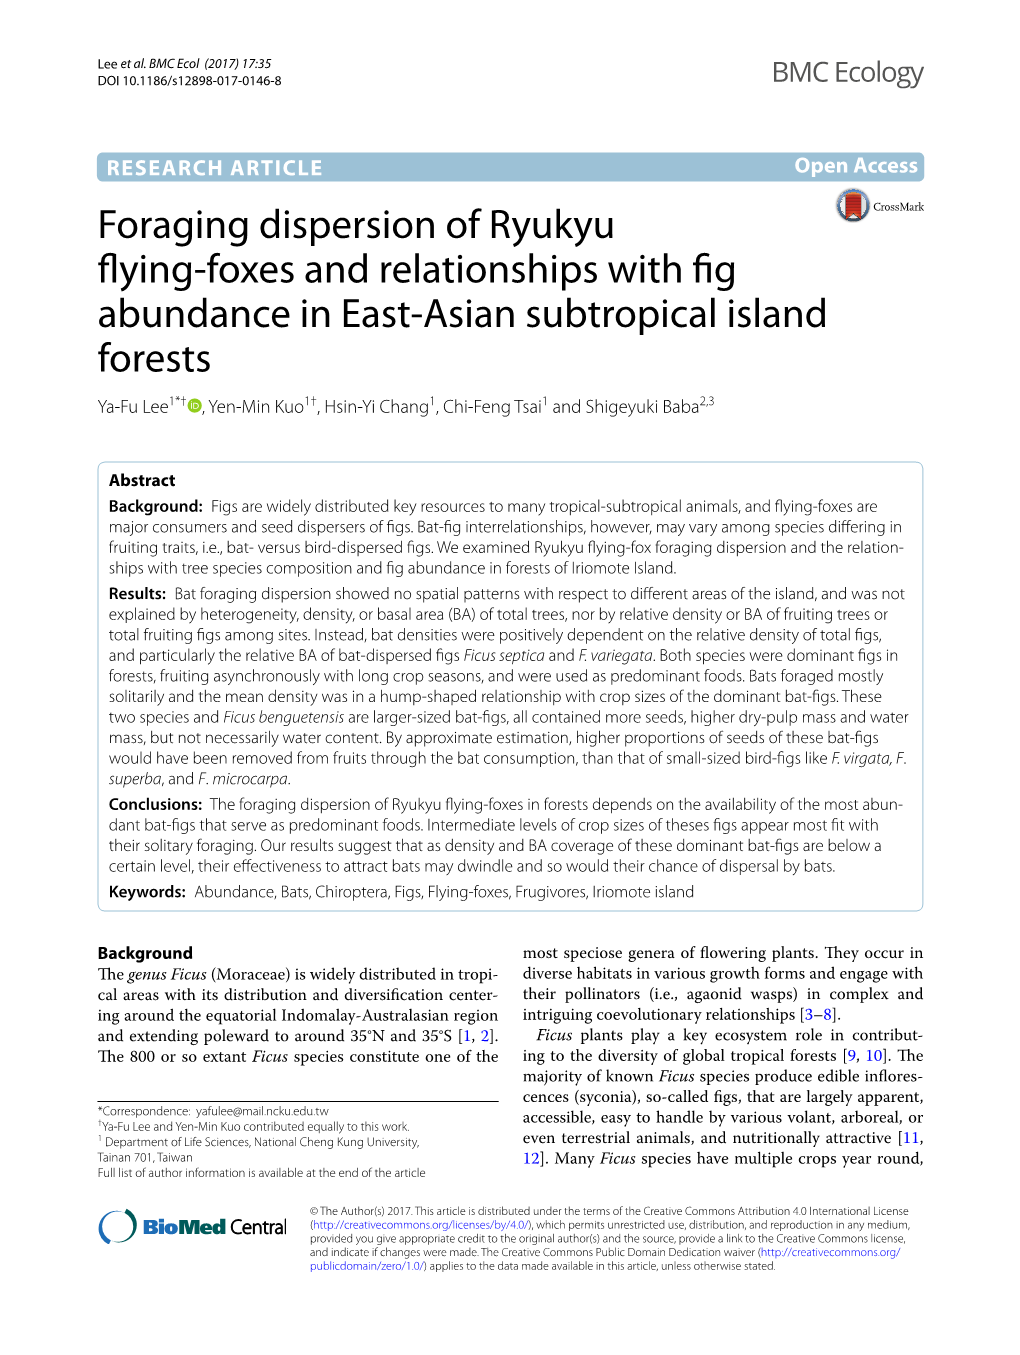 Foraging Dispersion of Ryukyu Flying-Foxes and Relationships with Fig Abundance in East-Asian Subtropical Island Forests